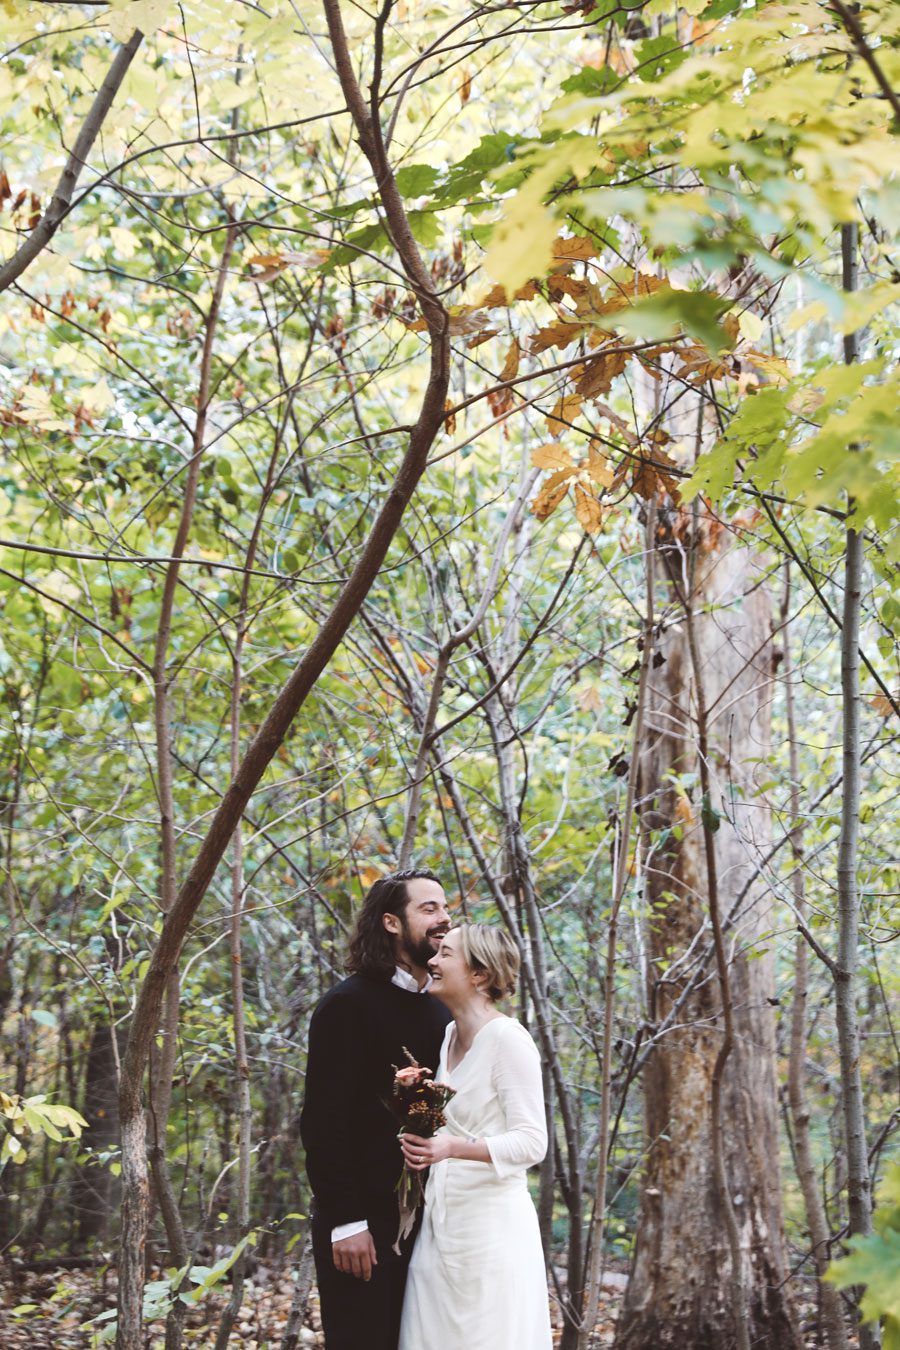 Intimate Central Park elopement